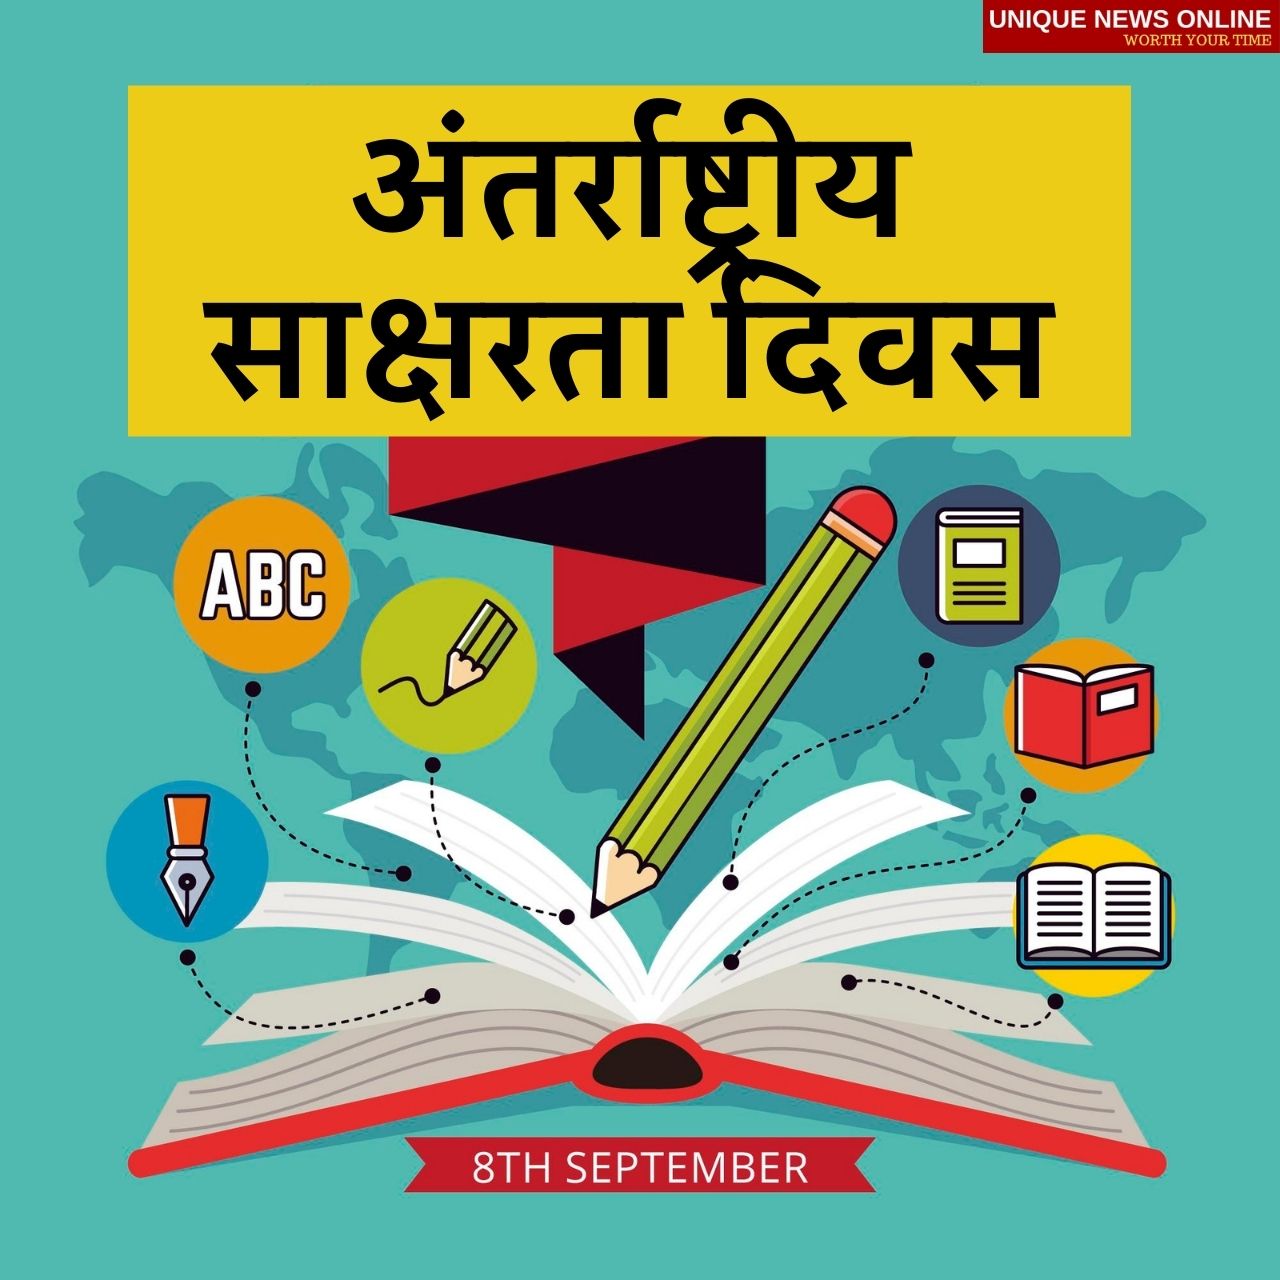 International Literacy Day 2021 Hindi Quotes, HD Images, Wishes, Messages, Greetings, Quotes, and Status to share